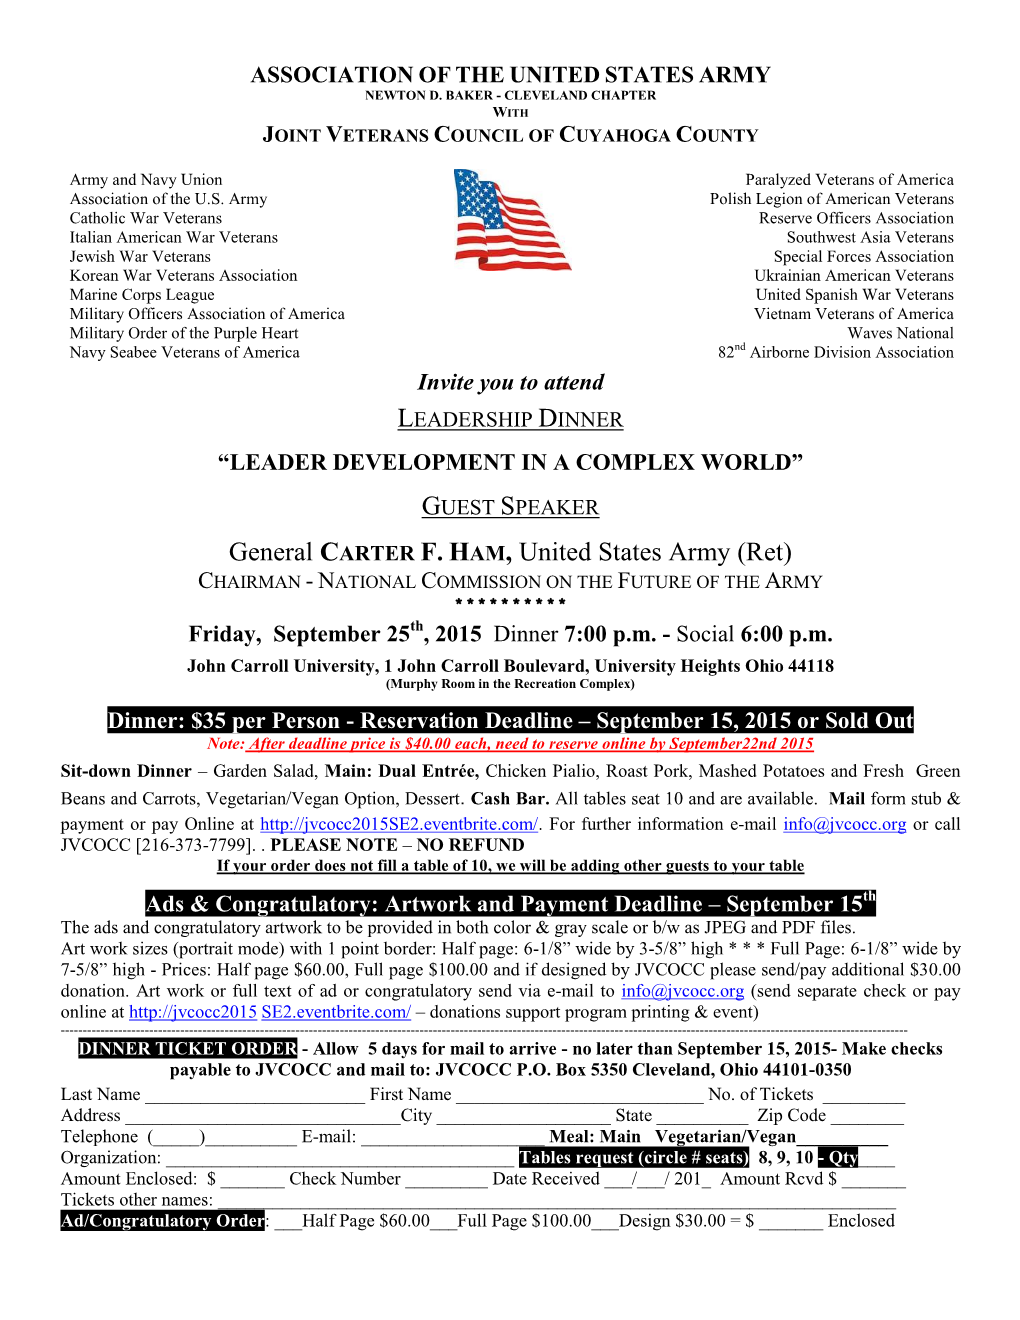 General CARTER F. HAM, United States Army (Ret) CHAIRMAN - NATIONAL COMMISSION on the FUTURE of the ARMY ********** Friday, September 25Th, 2015 Dinner 7:00 P.M